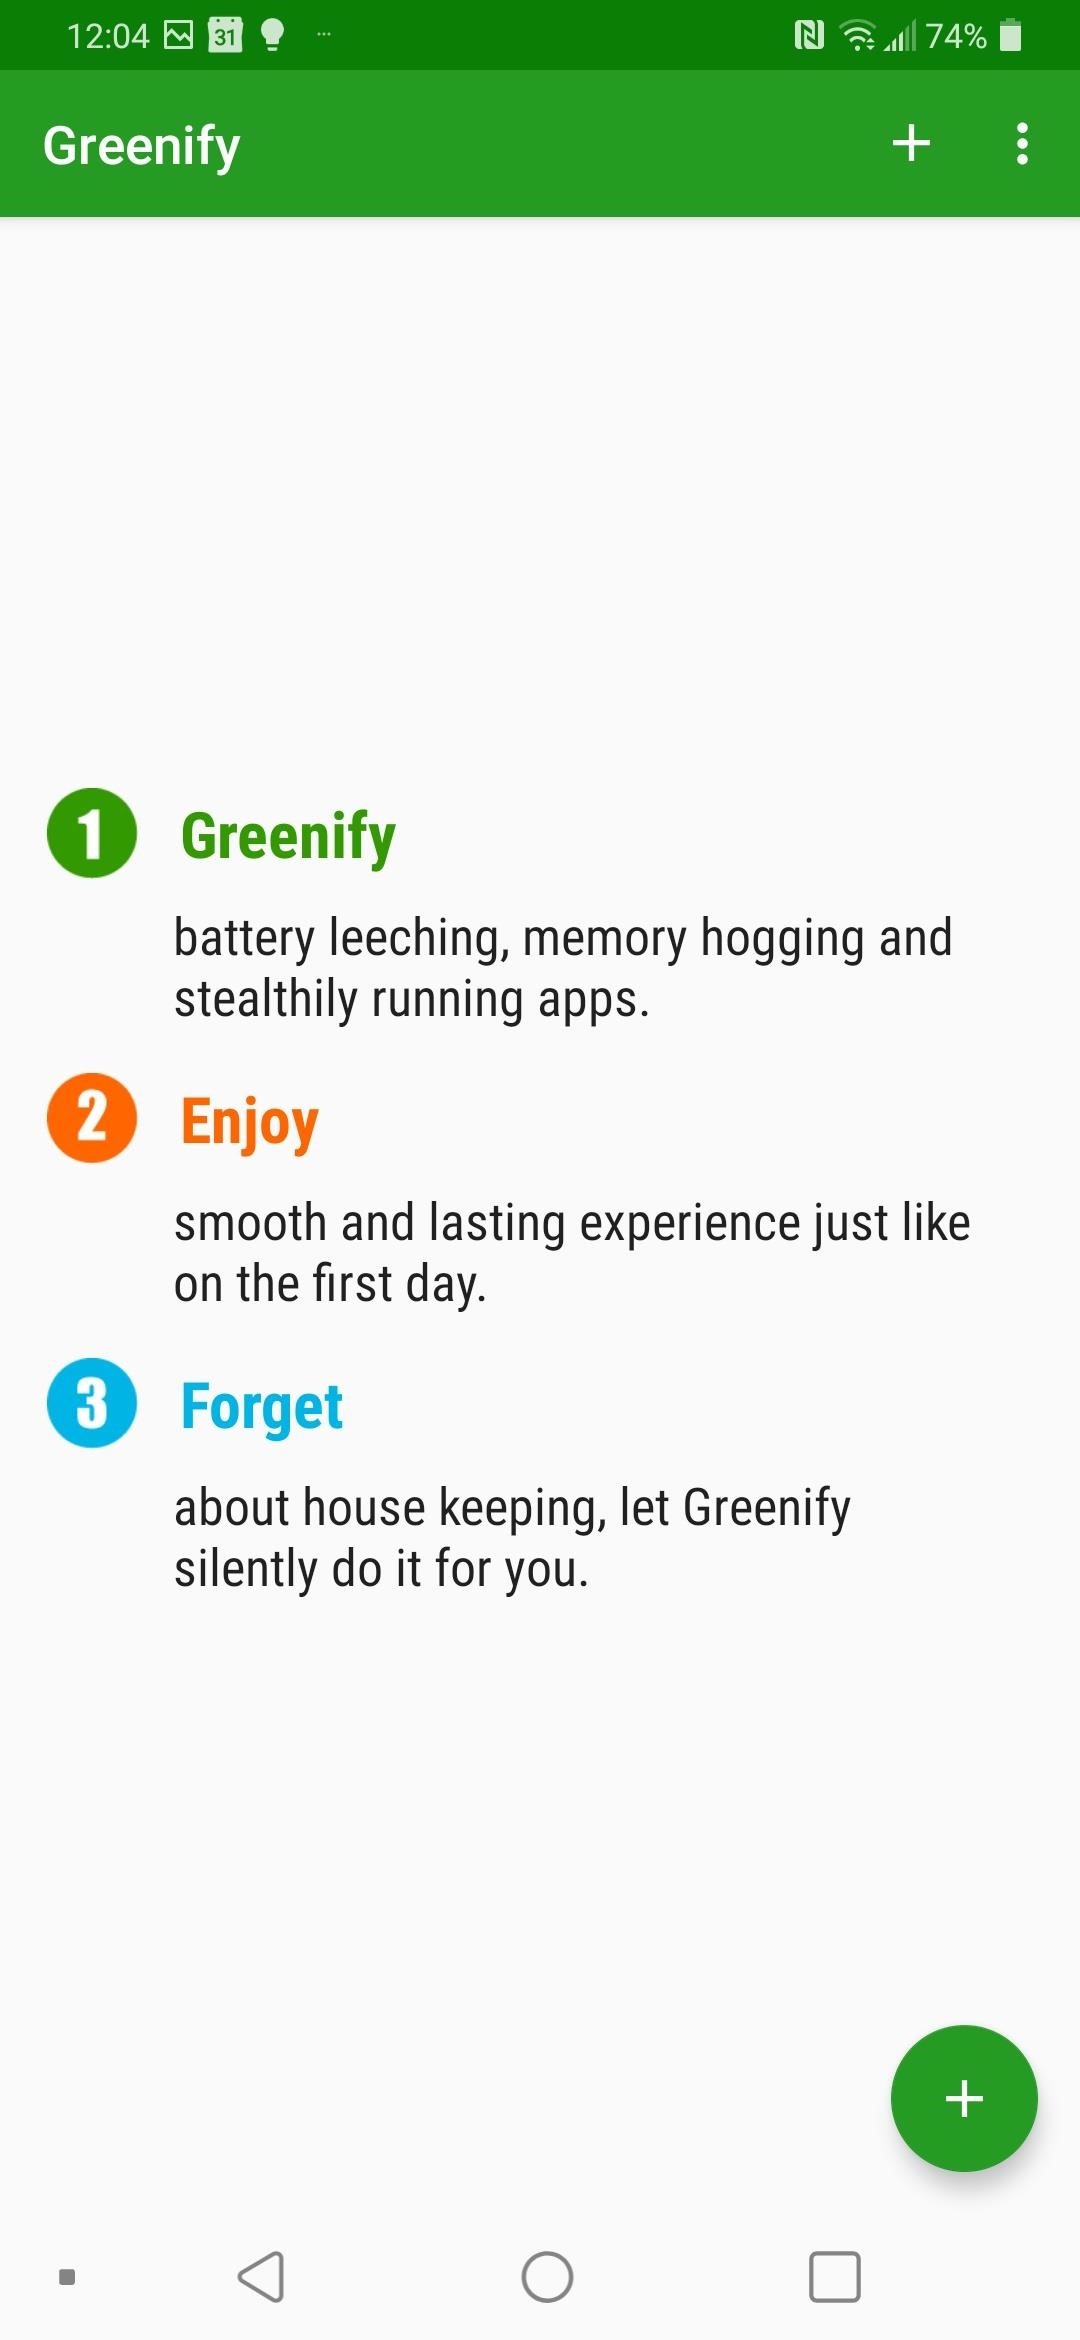 How to Set Up Greenify Without Root & Save Battery Life on Any Android